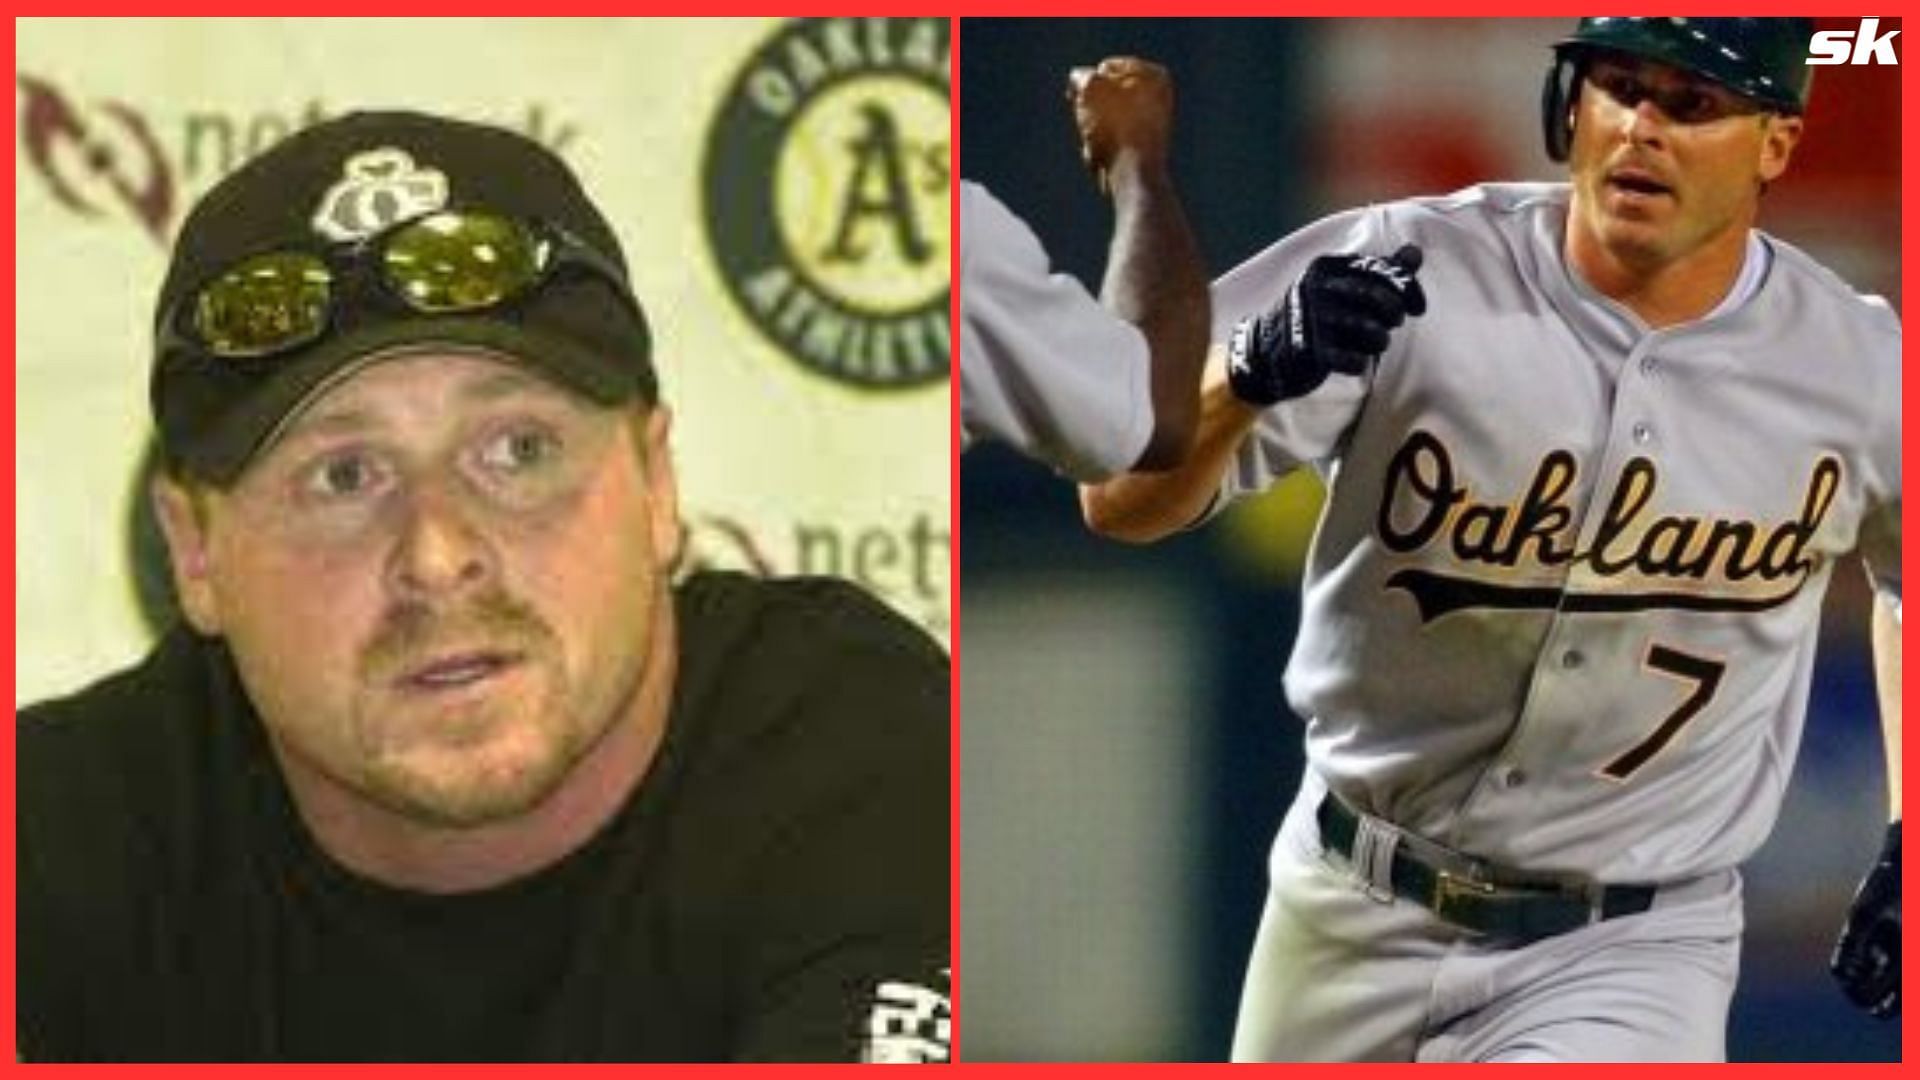 Jeremy Giambi once came clean about his PED use after prolonged investigation